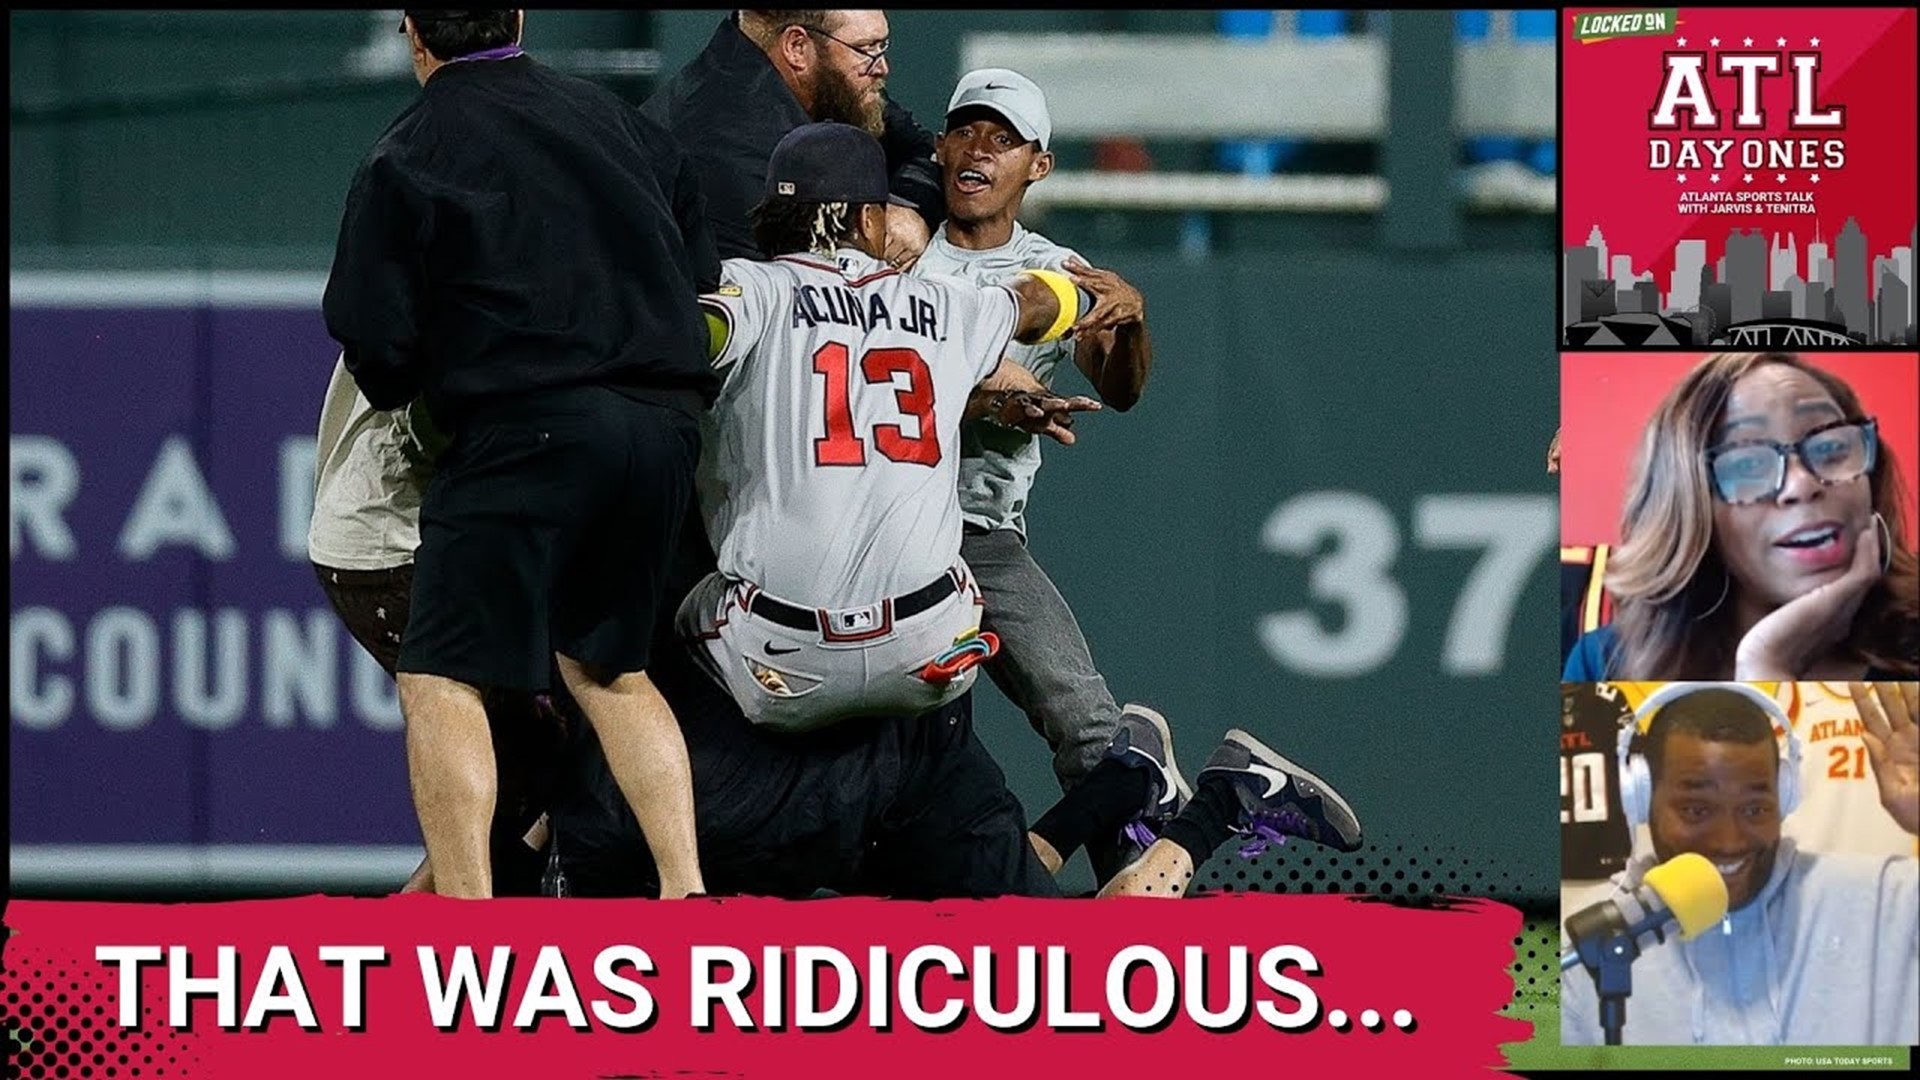 Ronald Acuna Jr. was accosted by a fan last night in their matchup against the Colorado Rockies. The Atlanta Braves have been a little suspect when it comes to